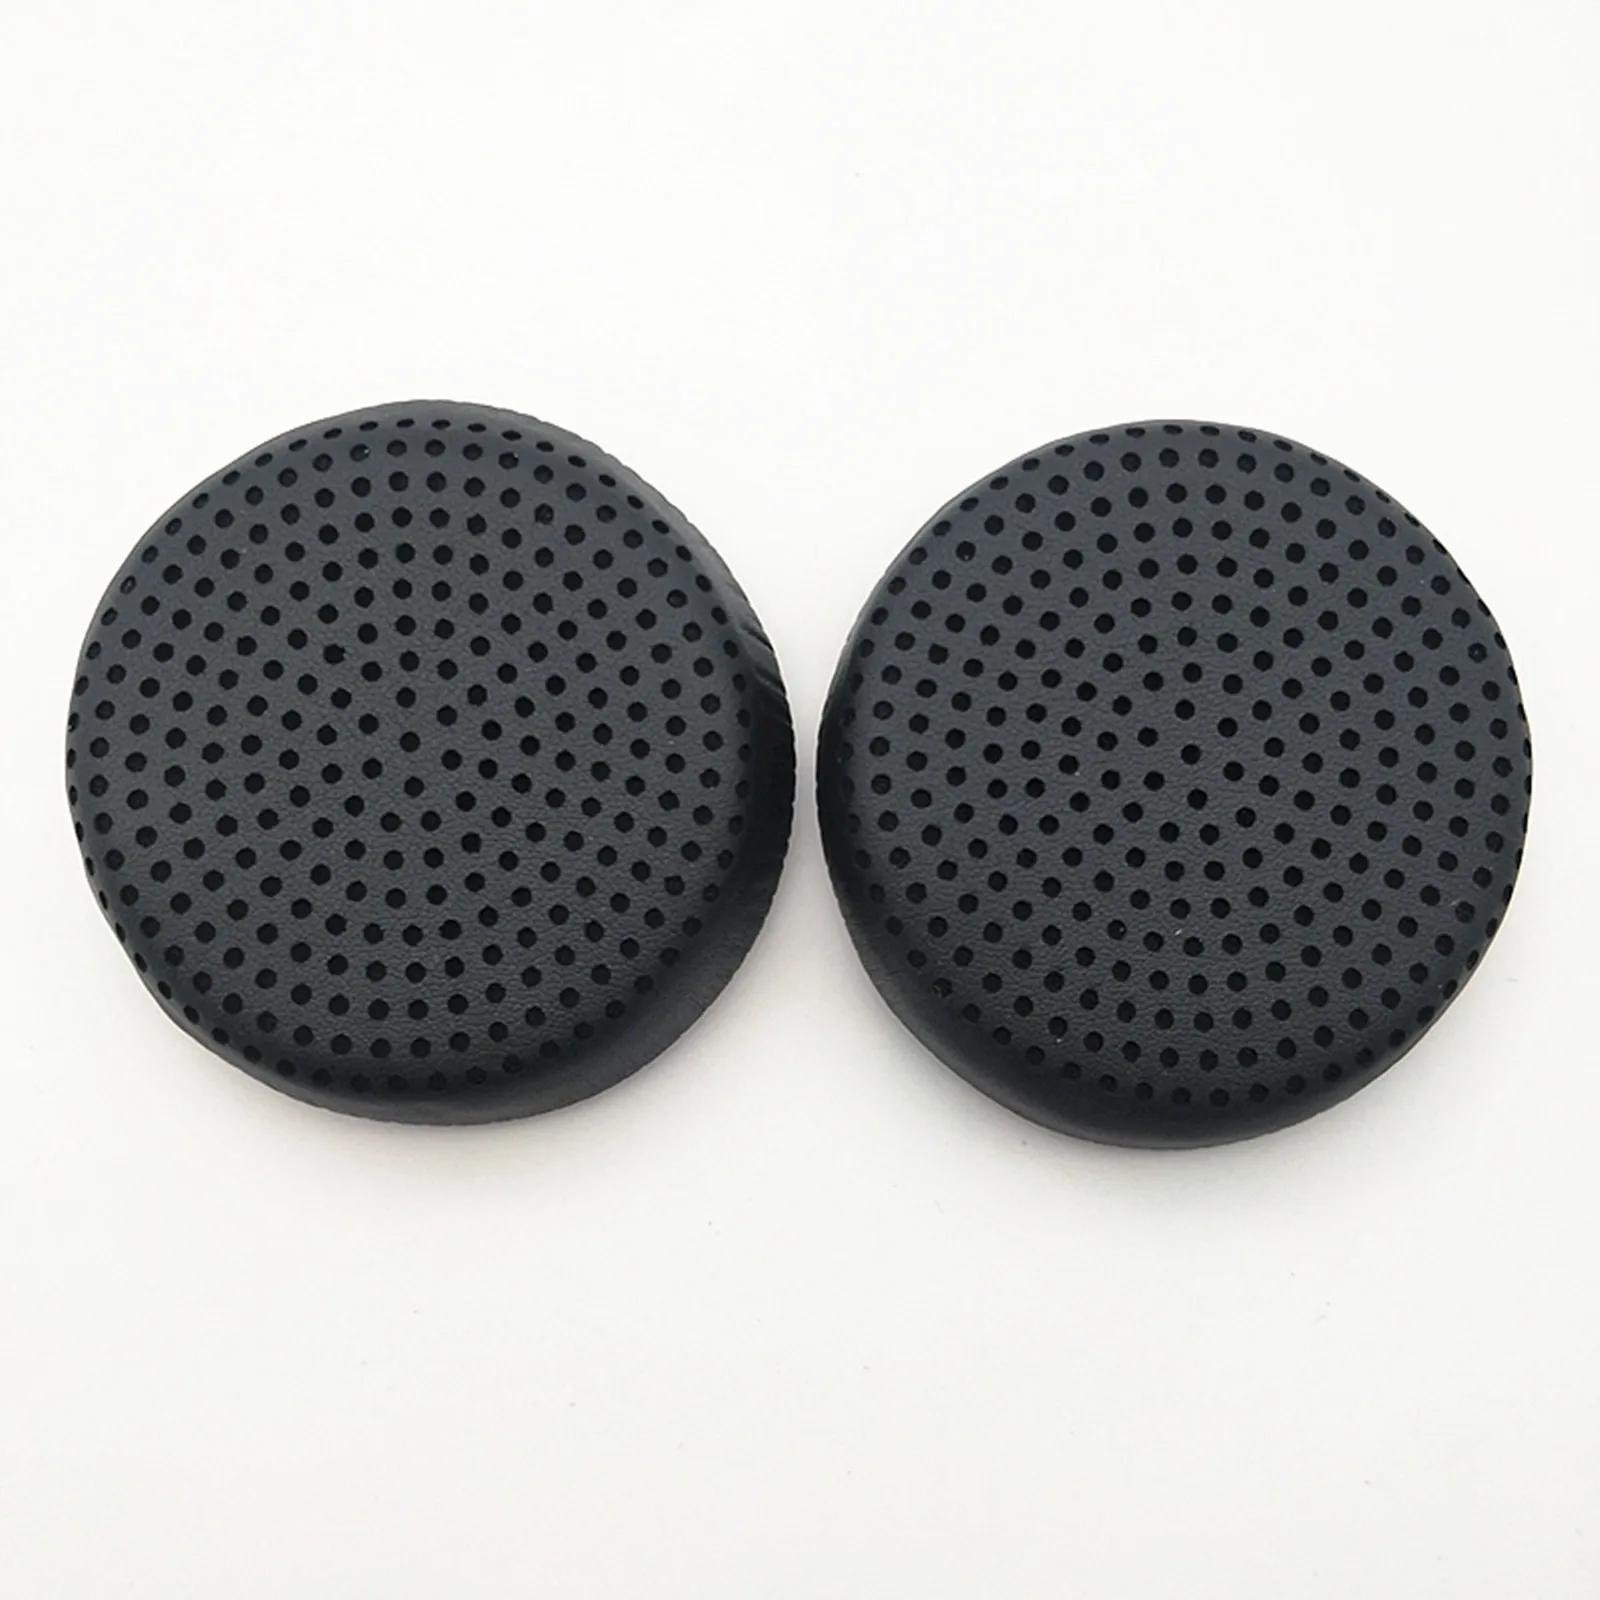 

1 Pair of Replacement Ear Pads Cushion Cover Earpads Cups for Skullcandy Grind Wireless Heaphone Headset Pads Cover